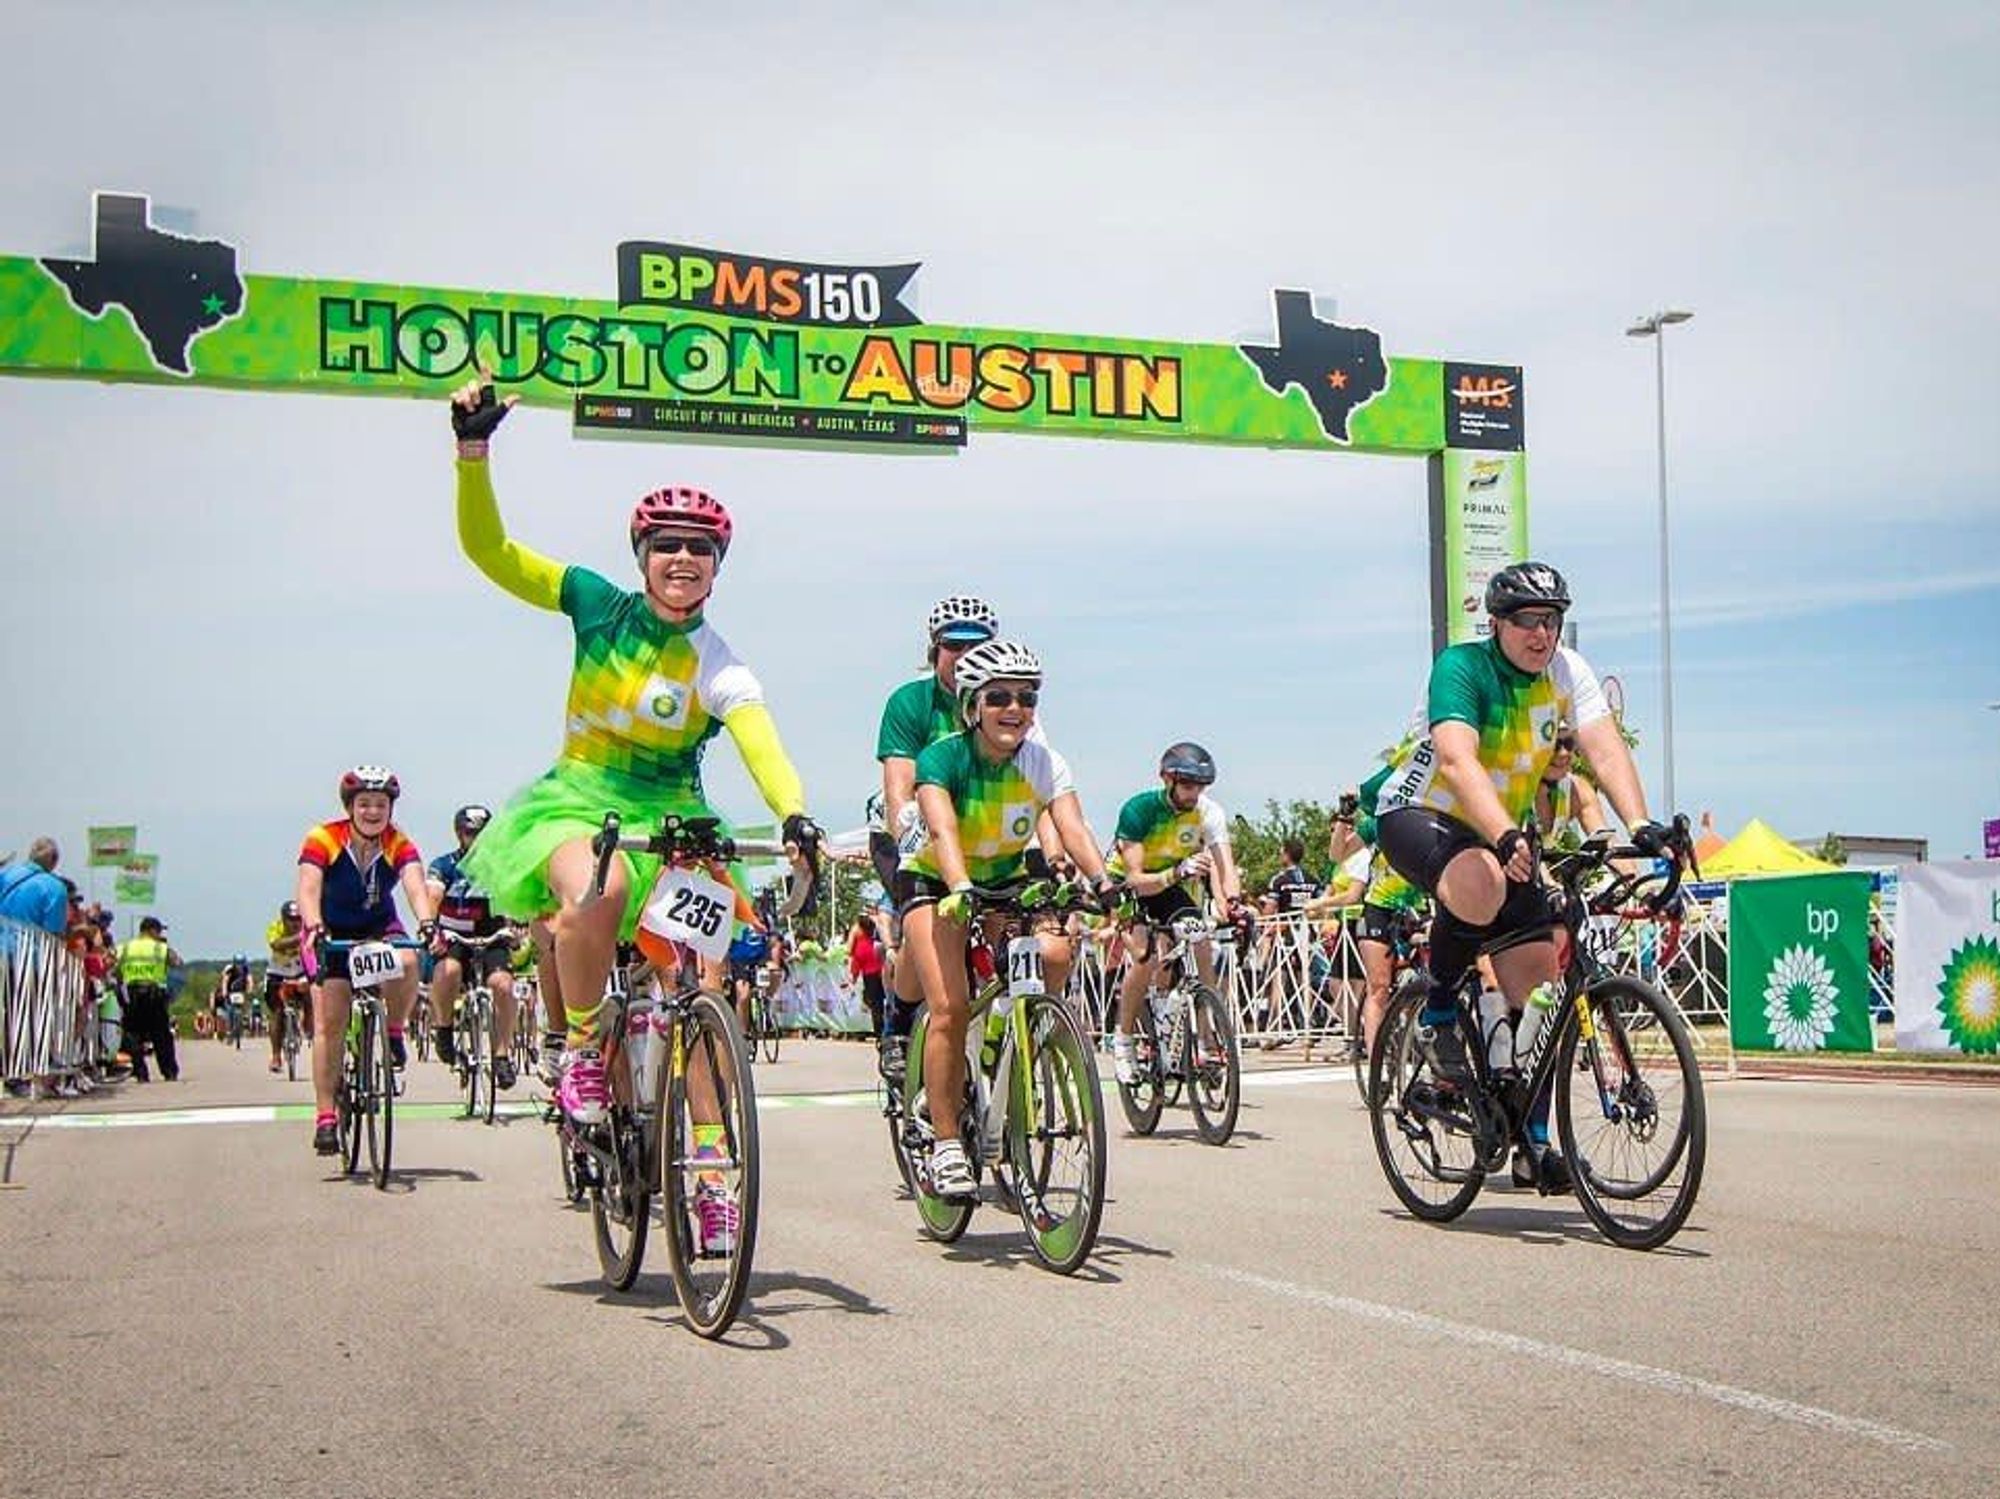 Ken Hoffman's 5 tips for easy ridin' at this year's MS 150 Texas